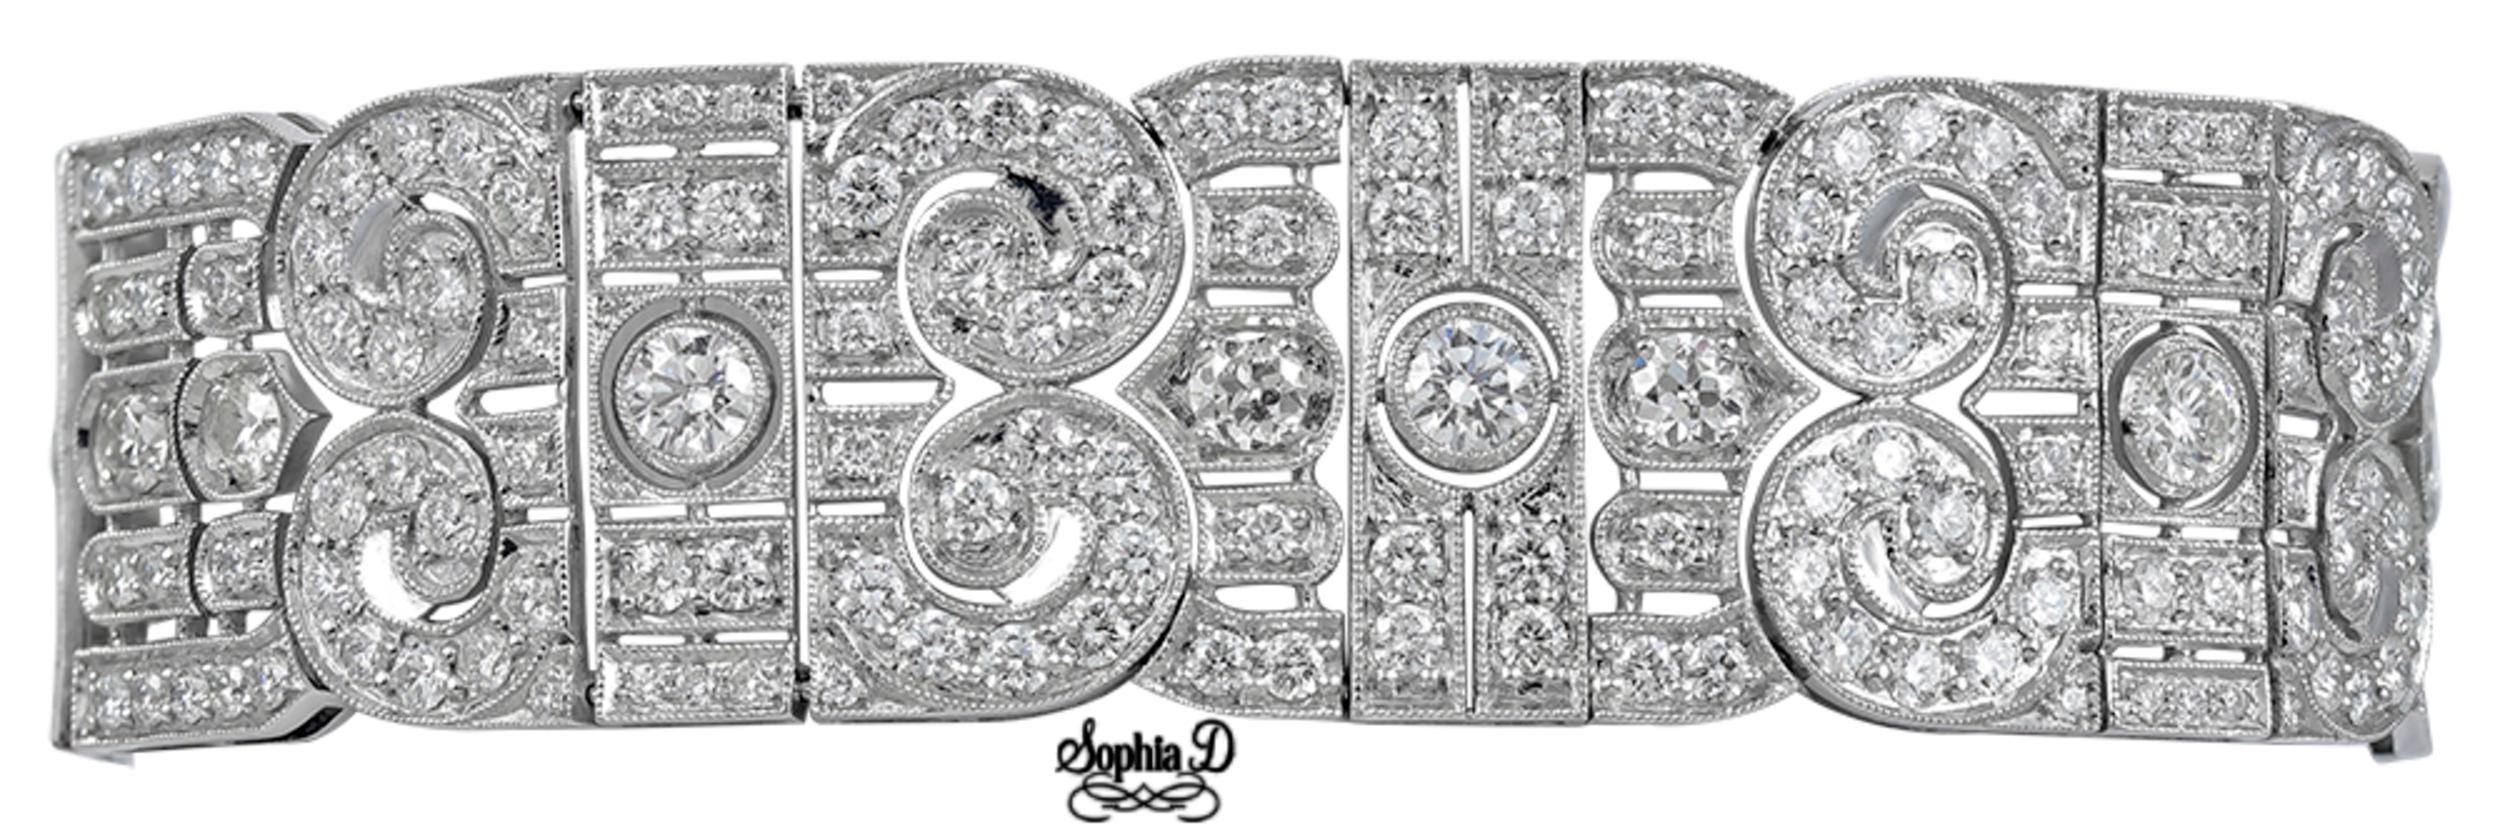 This stunning bracelet designed by Sophia D is with 6 center round diamonds with the total carat weight of 3.74 carats surrounded with brilliant round diamonds with carat weight of 17.63. 

The length of the bracelet is 7.5